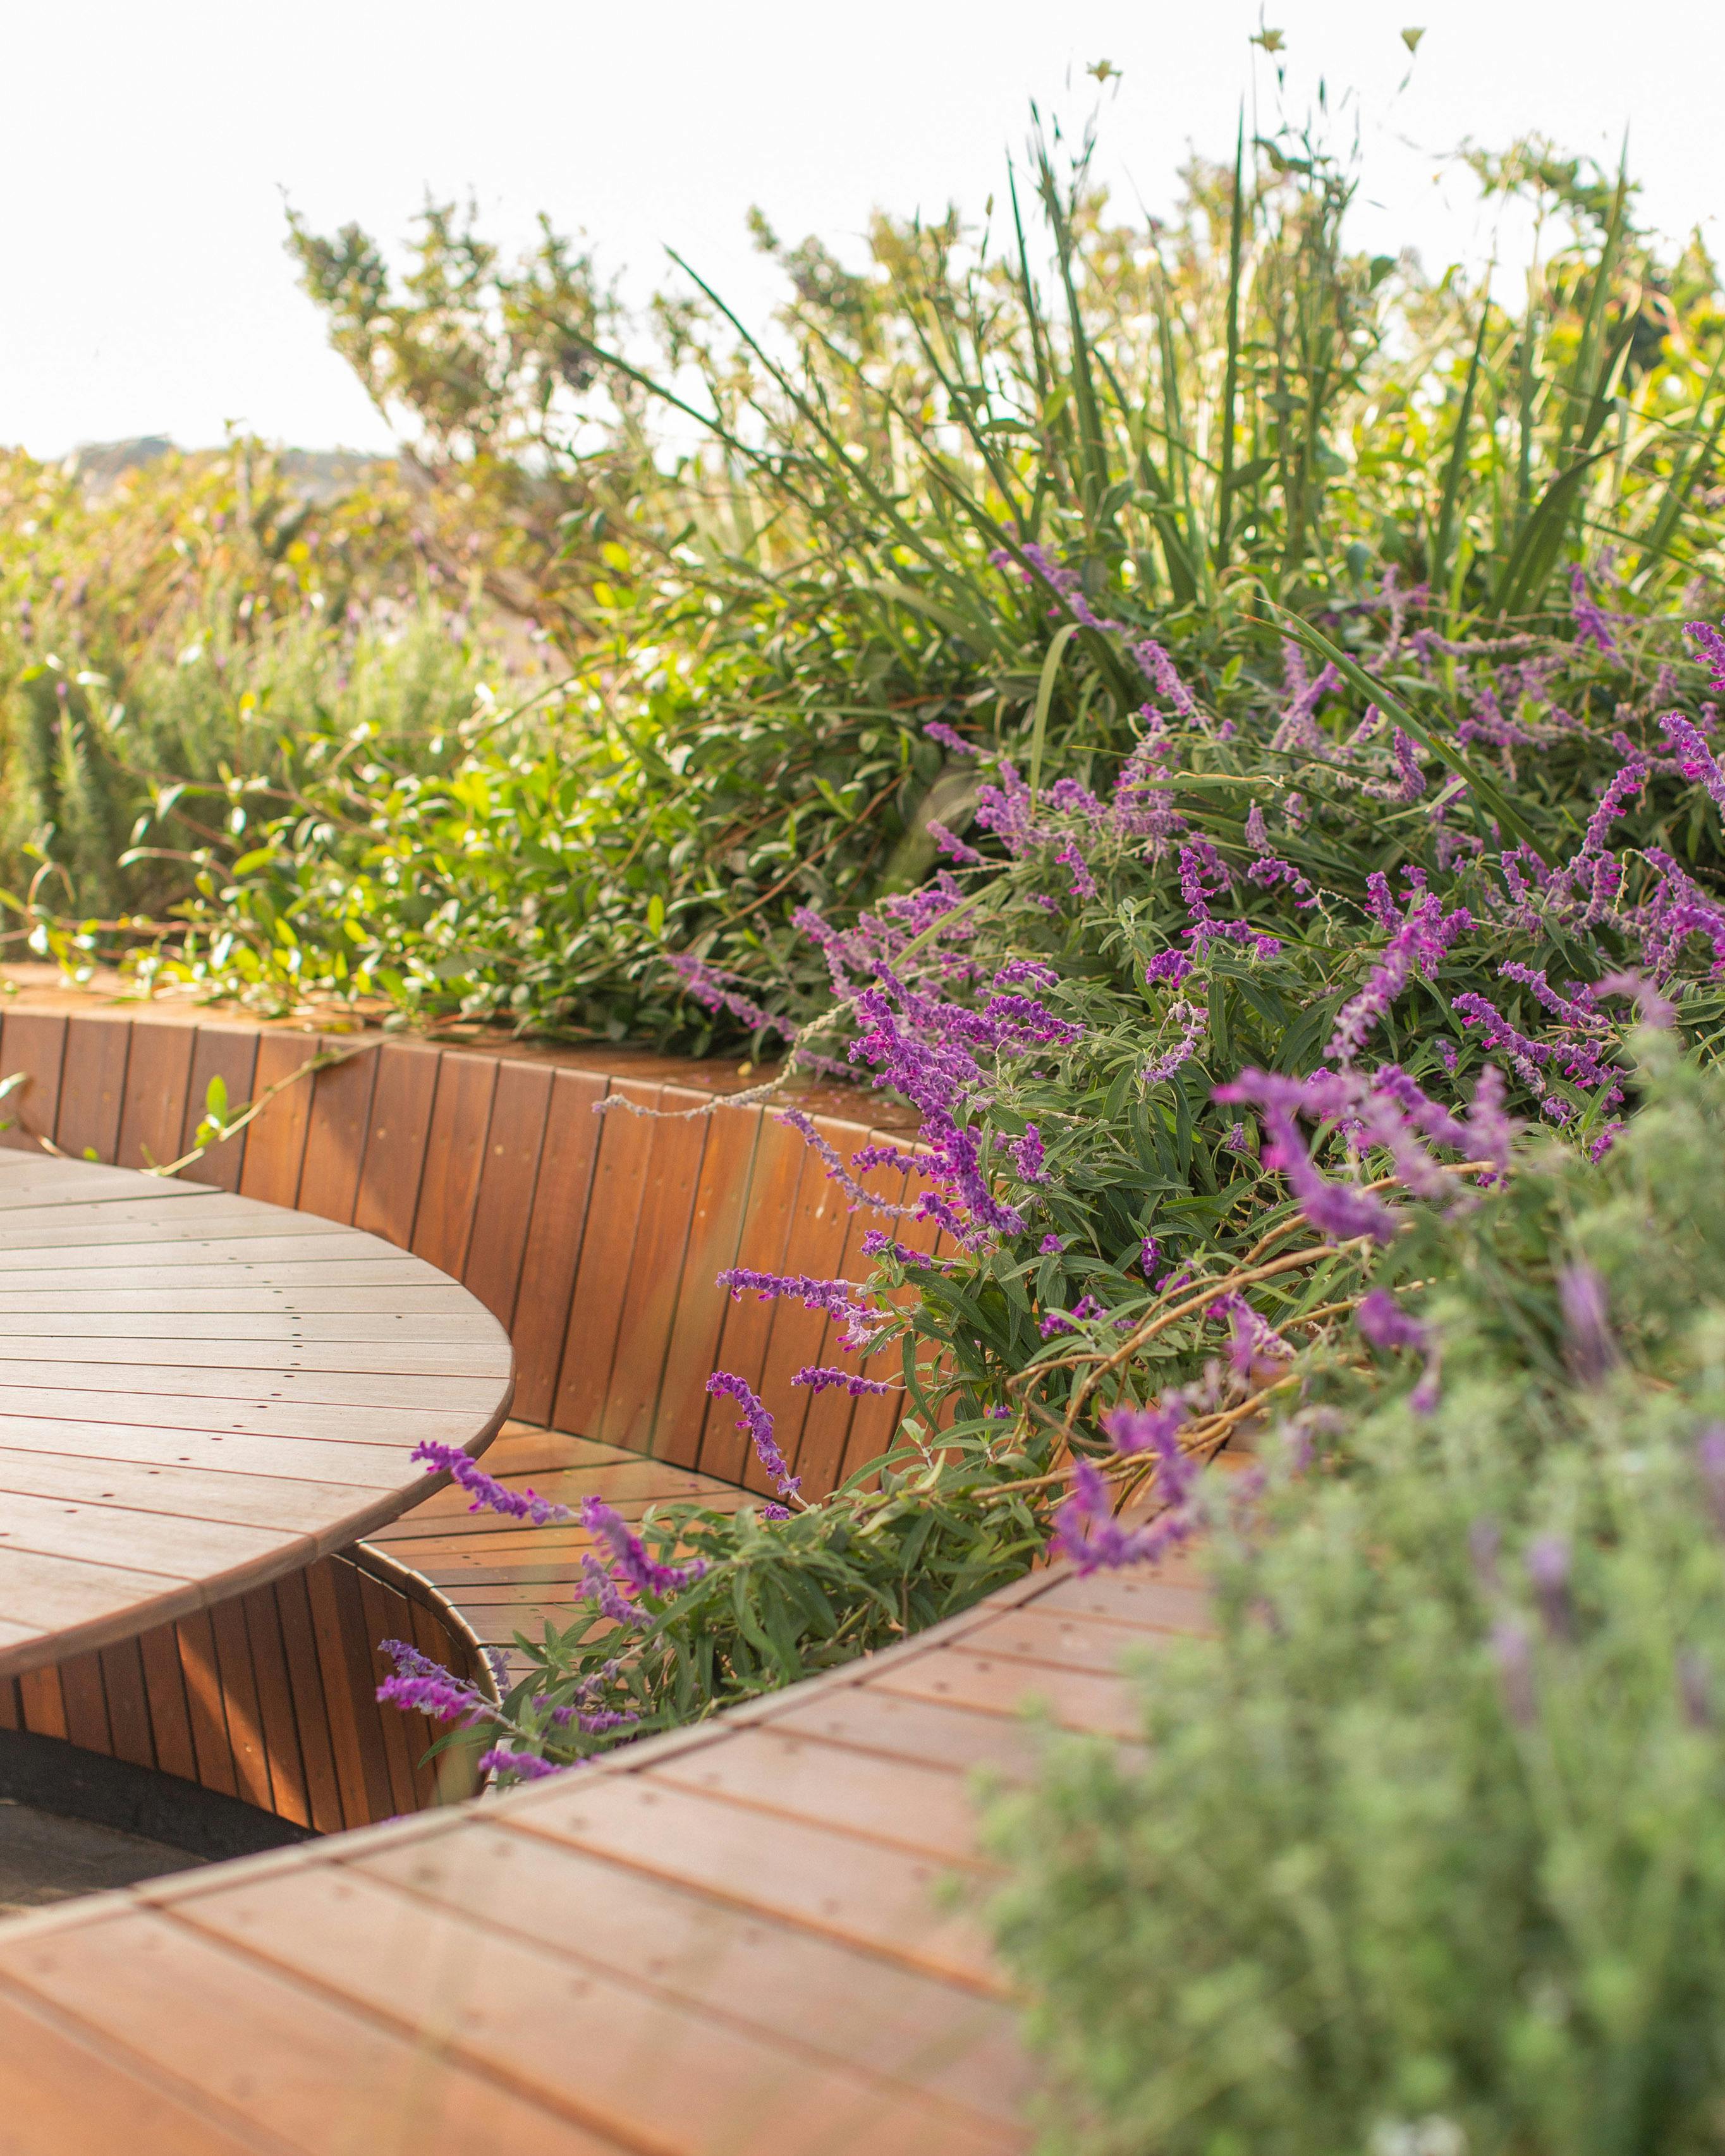 A photograph of plants growing wildly around a curved timber seating area in a rooftop garden. There are various textures and tones of green, as well as bright purple flowers dancing about. 